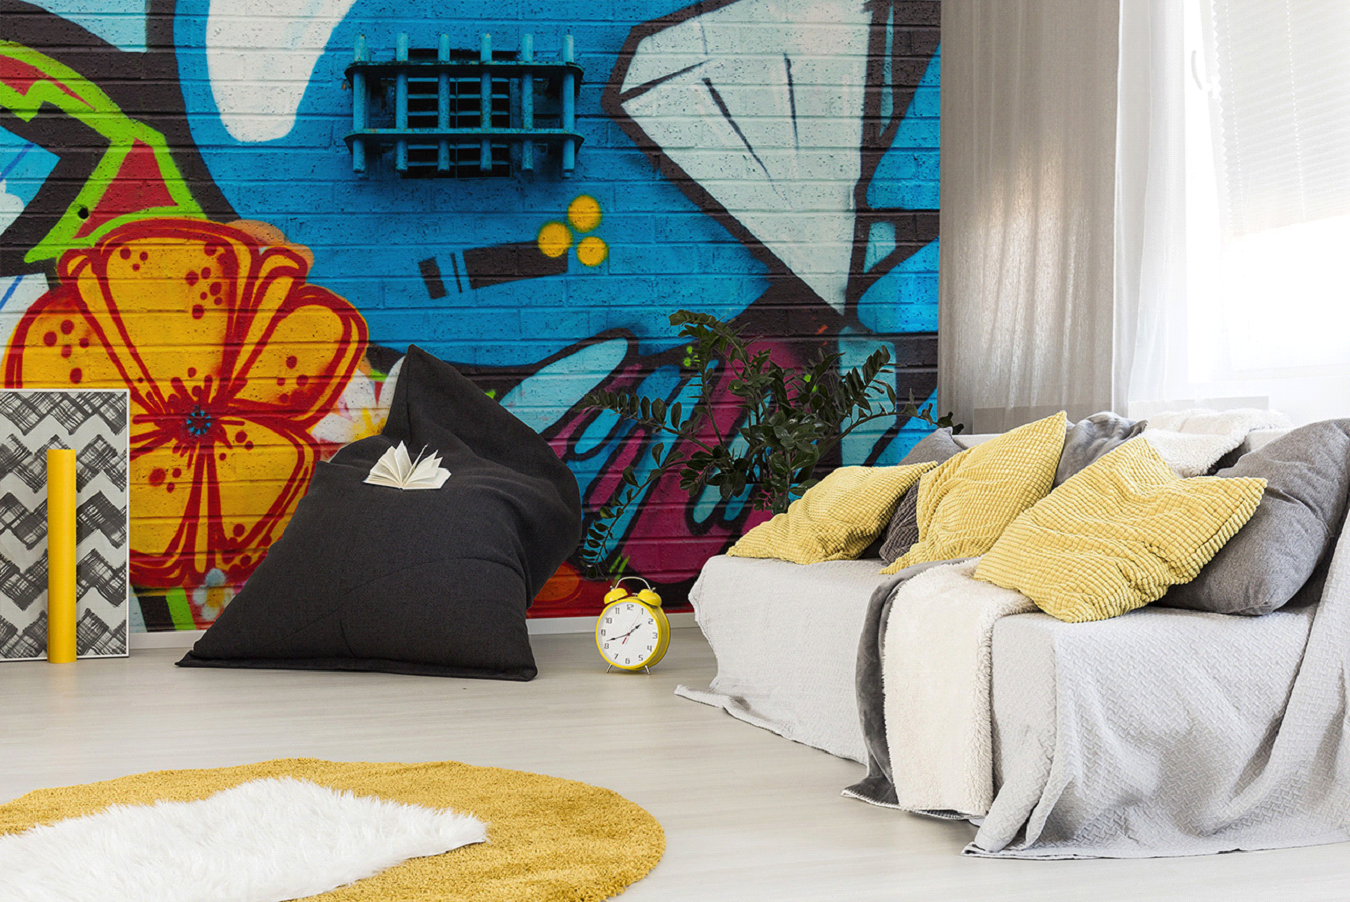 Home-decor-street-style-3 Street art at home? You can count us in!